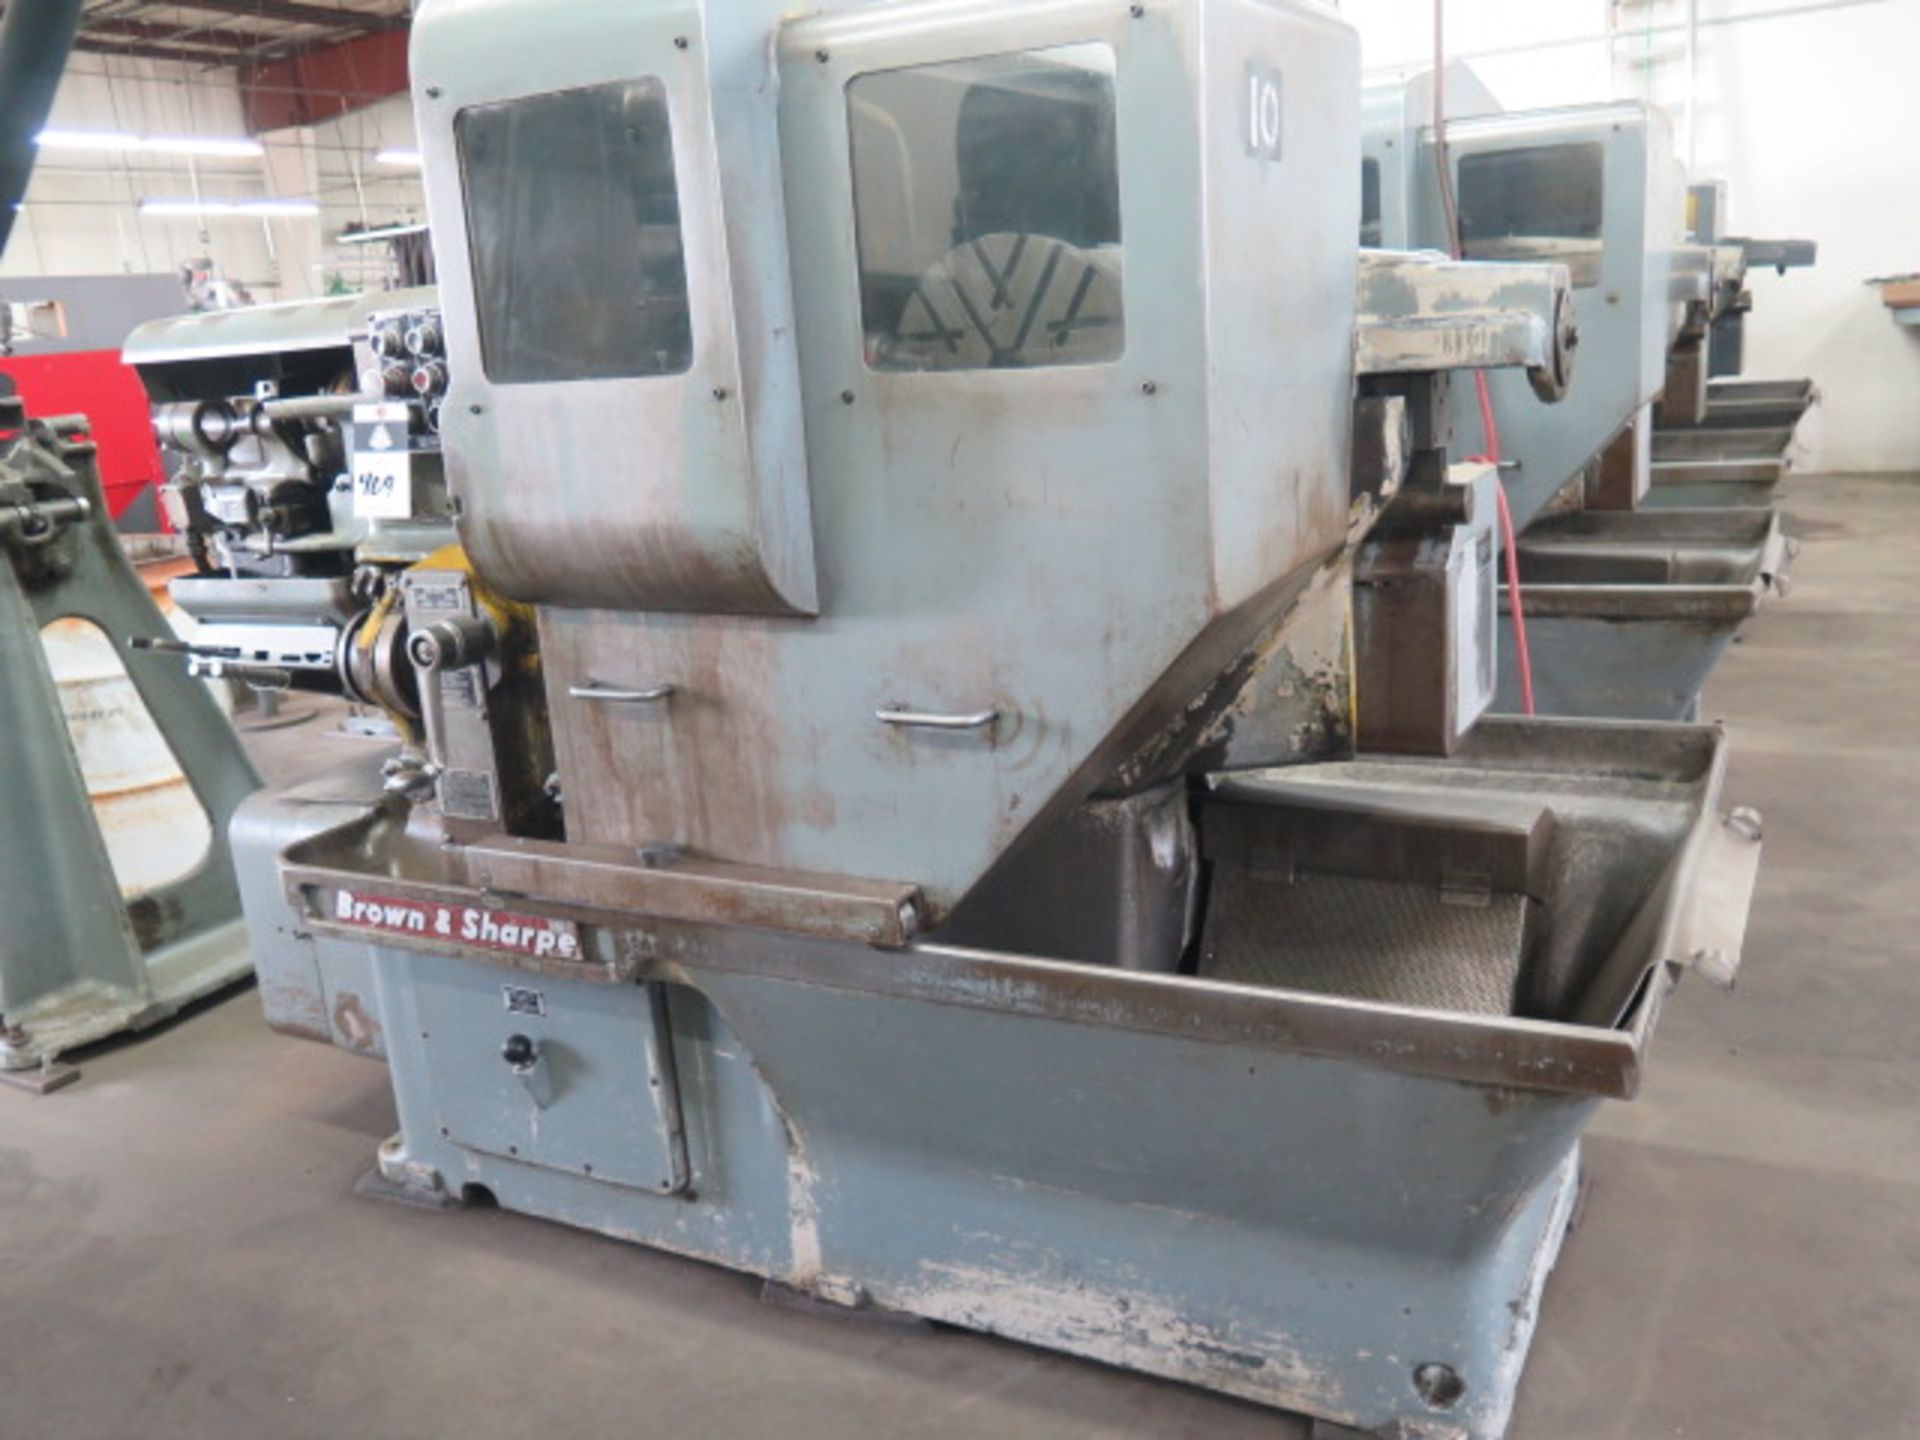 Brown & Sharpe No. 4 Automatic Screw Machine w/ 3-Cross Slides, Rotary Style Turret, SOLD AS IS